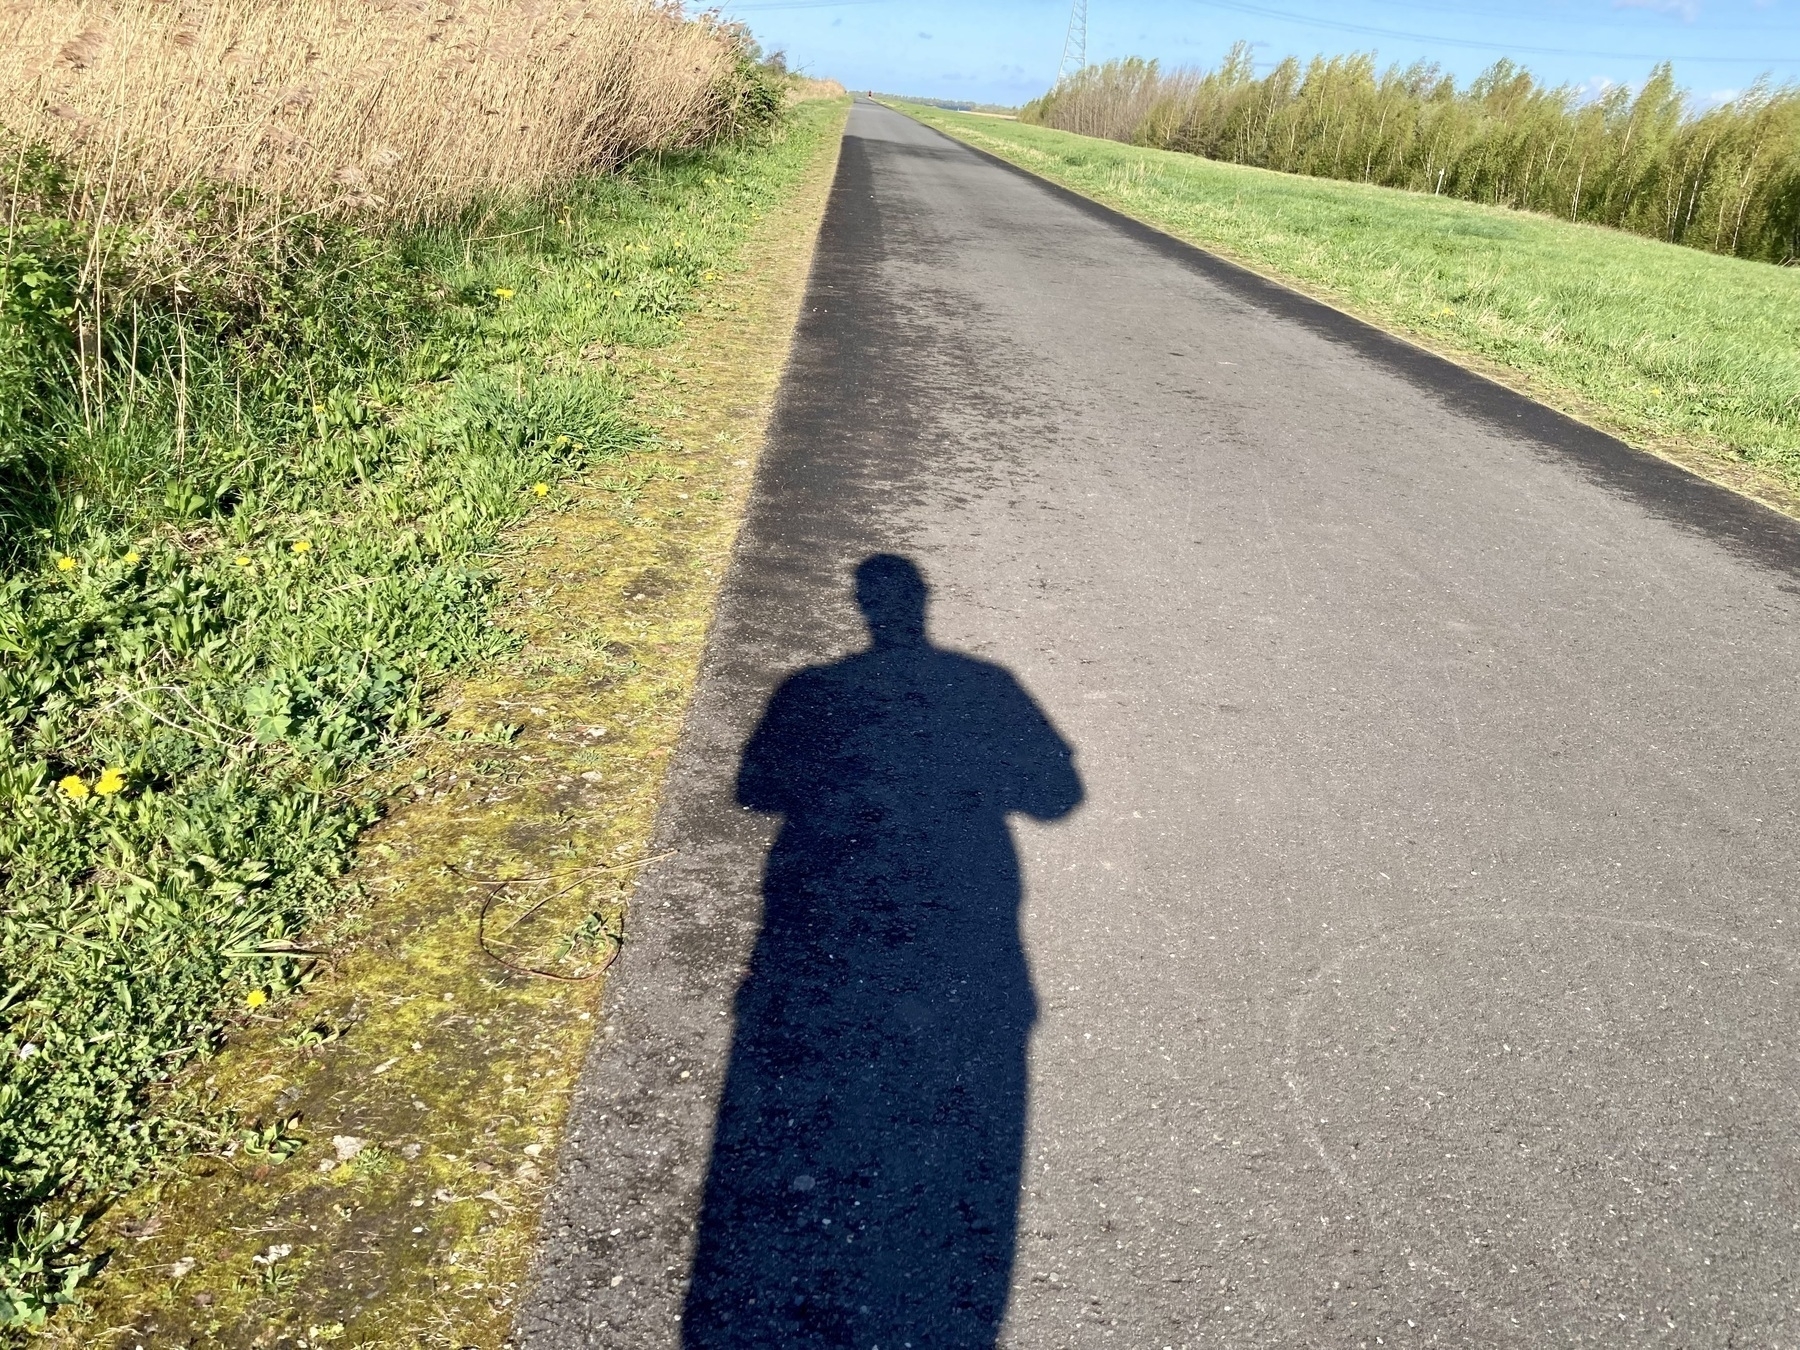 shadow of runner on a bike path through nature